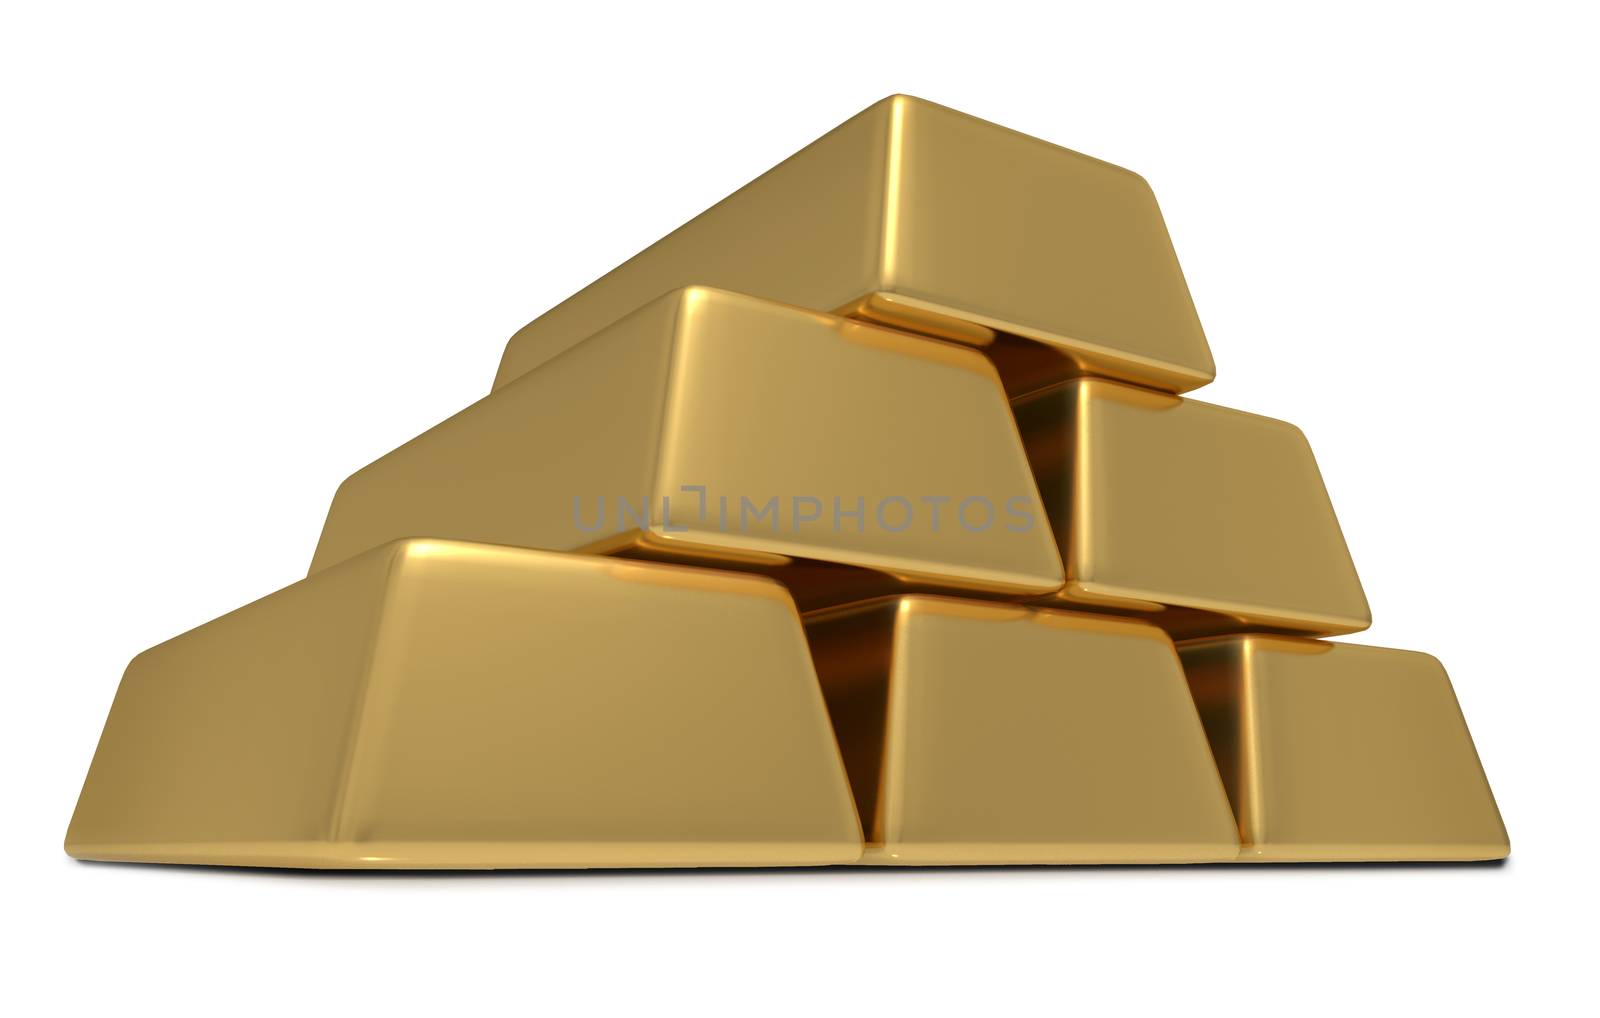 3D rendering of six gold bullion bars representing enormous weat by Balefire9